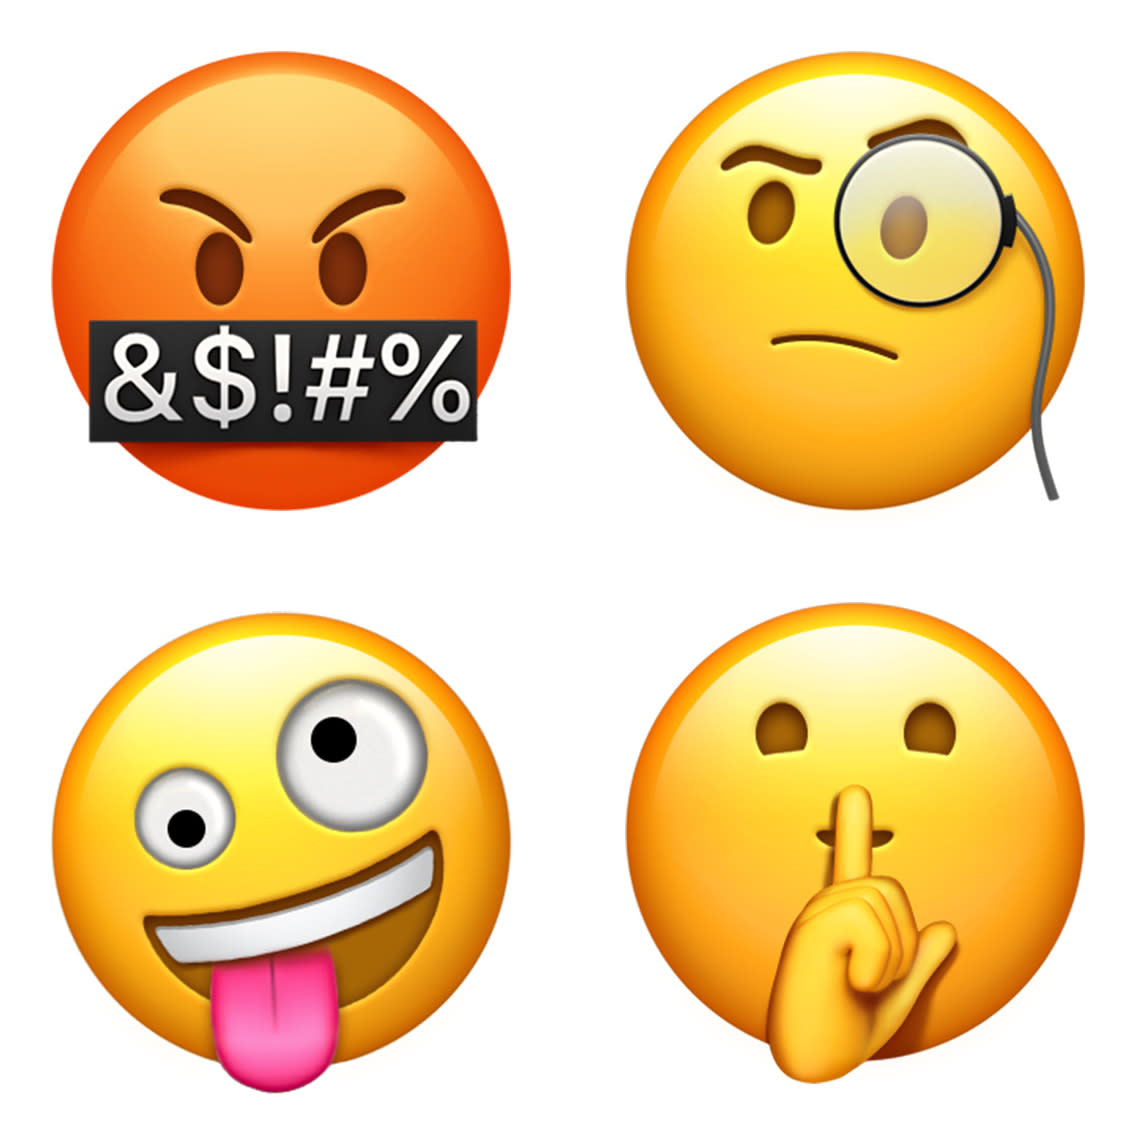 Here are some of the wild new emojis coming to the iPhone